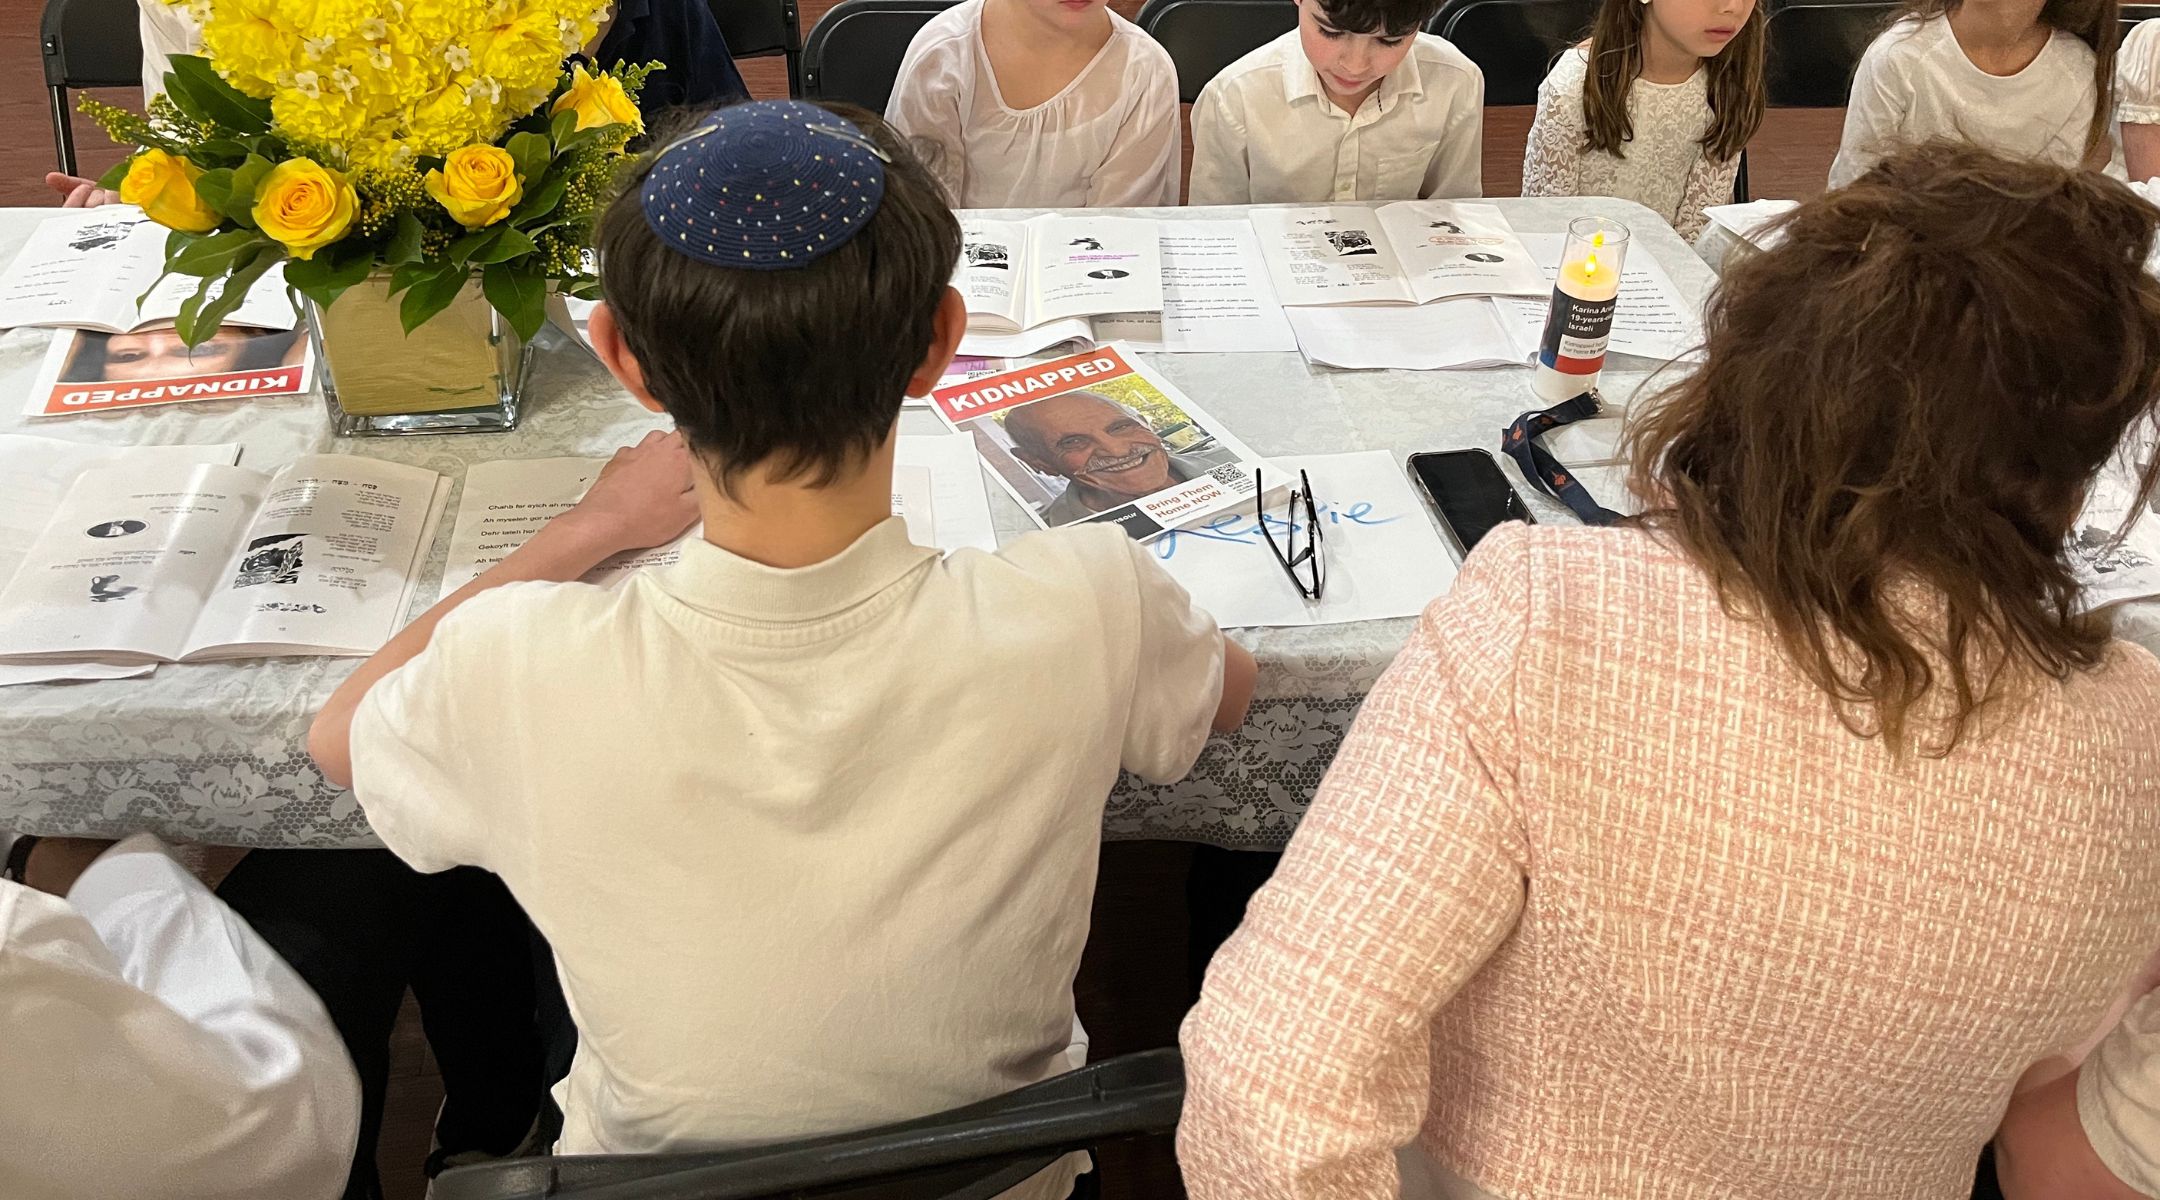 11 Passover haggadah supplements to print if you want to discuss Oct. 7 at your seder